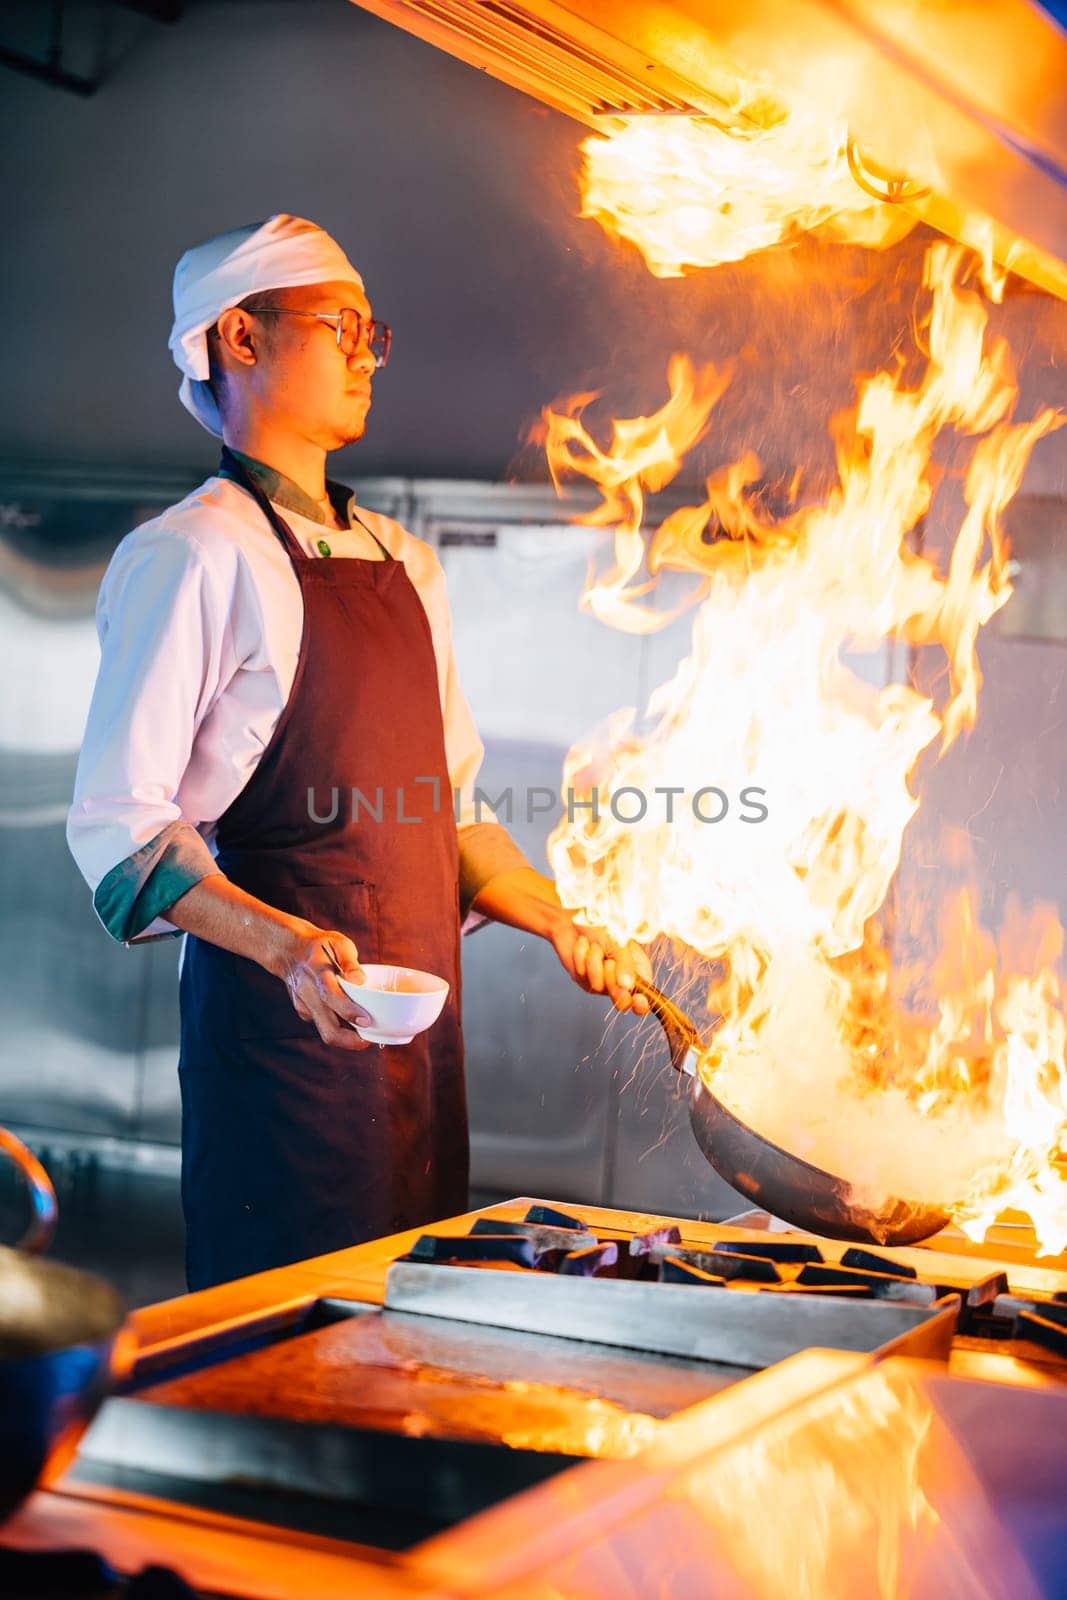 Closeup of chef hands in professional kitchen handling flaming wok. Expertise at work flames cooking food. Skilled chef busy in modern kitchen with flames. cook food with fire by Sorapop